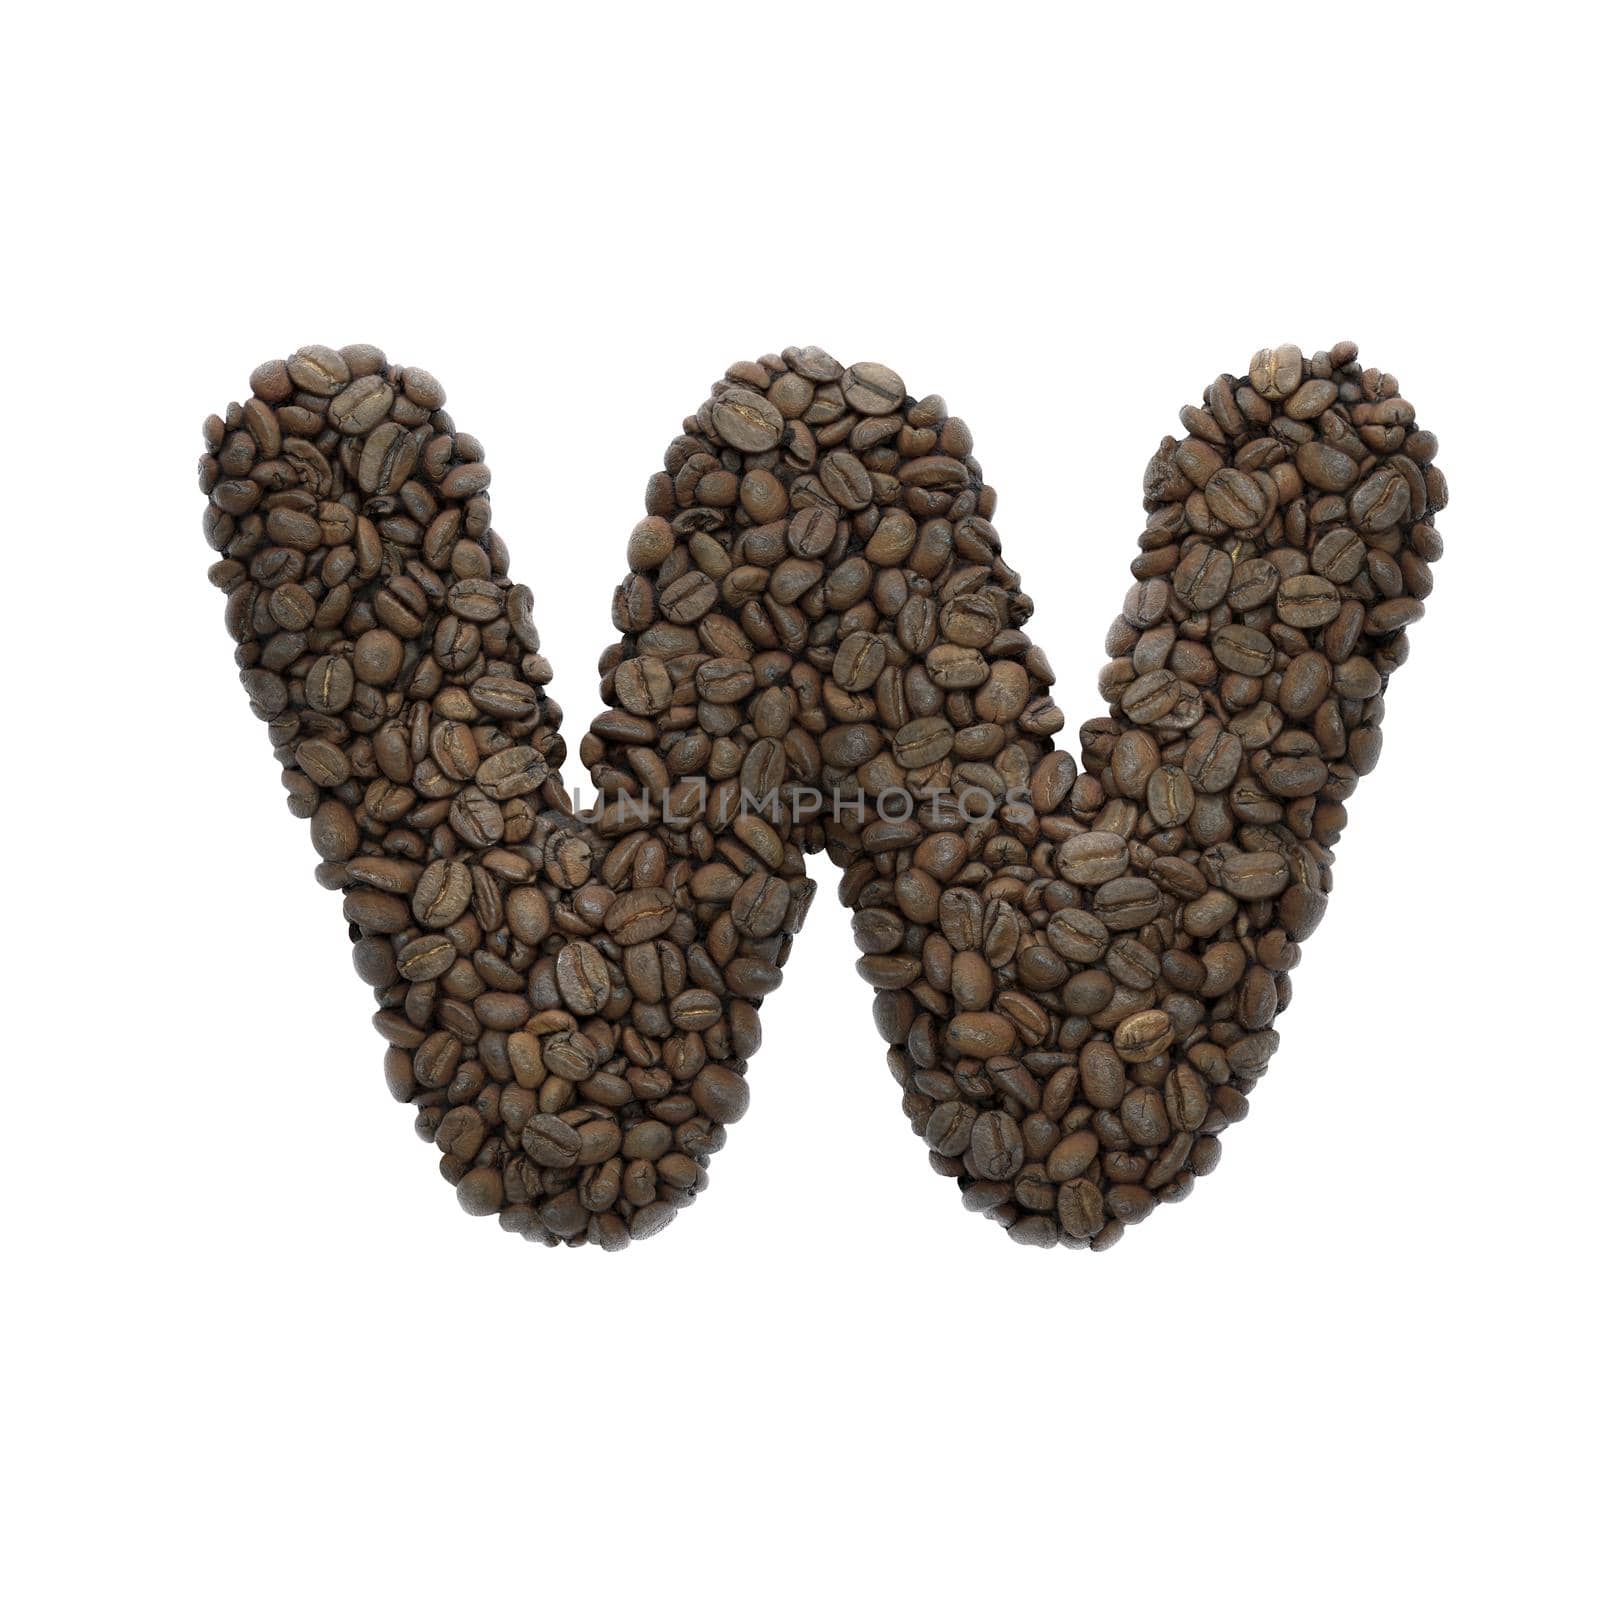 Coffee letter W - Lower-case 3d roasted beans font isolated on white background. This alphabet is perfect for creative illustrations related but not limited to Coffee, energy, insomnia...